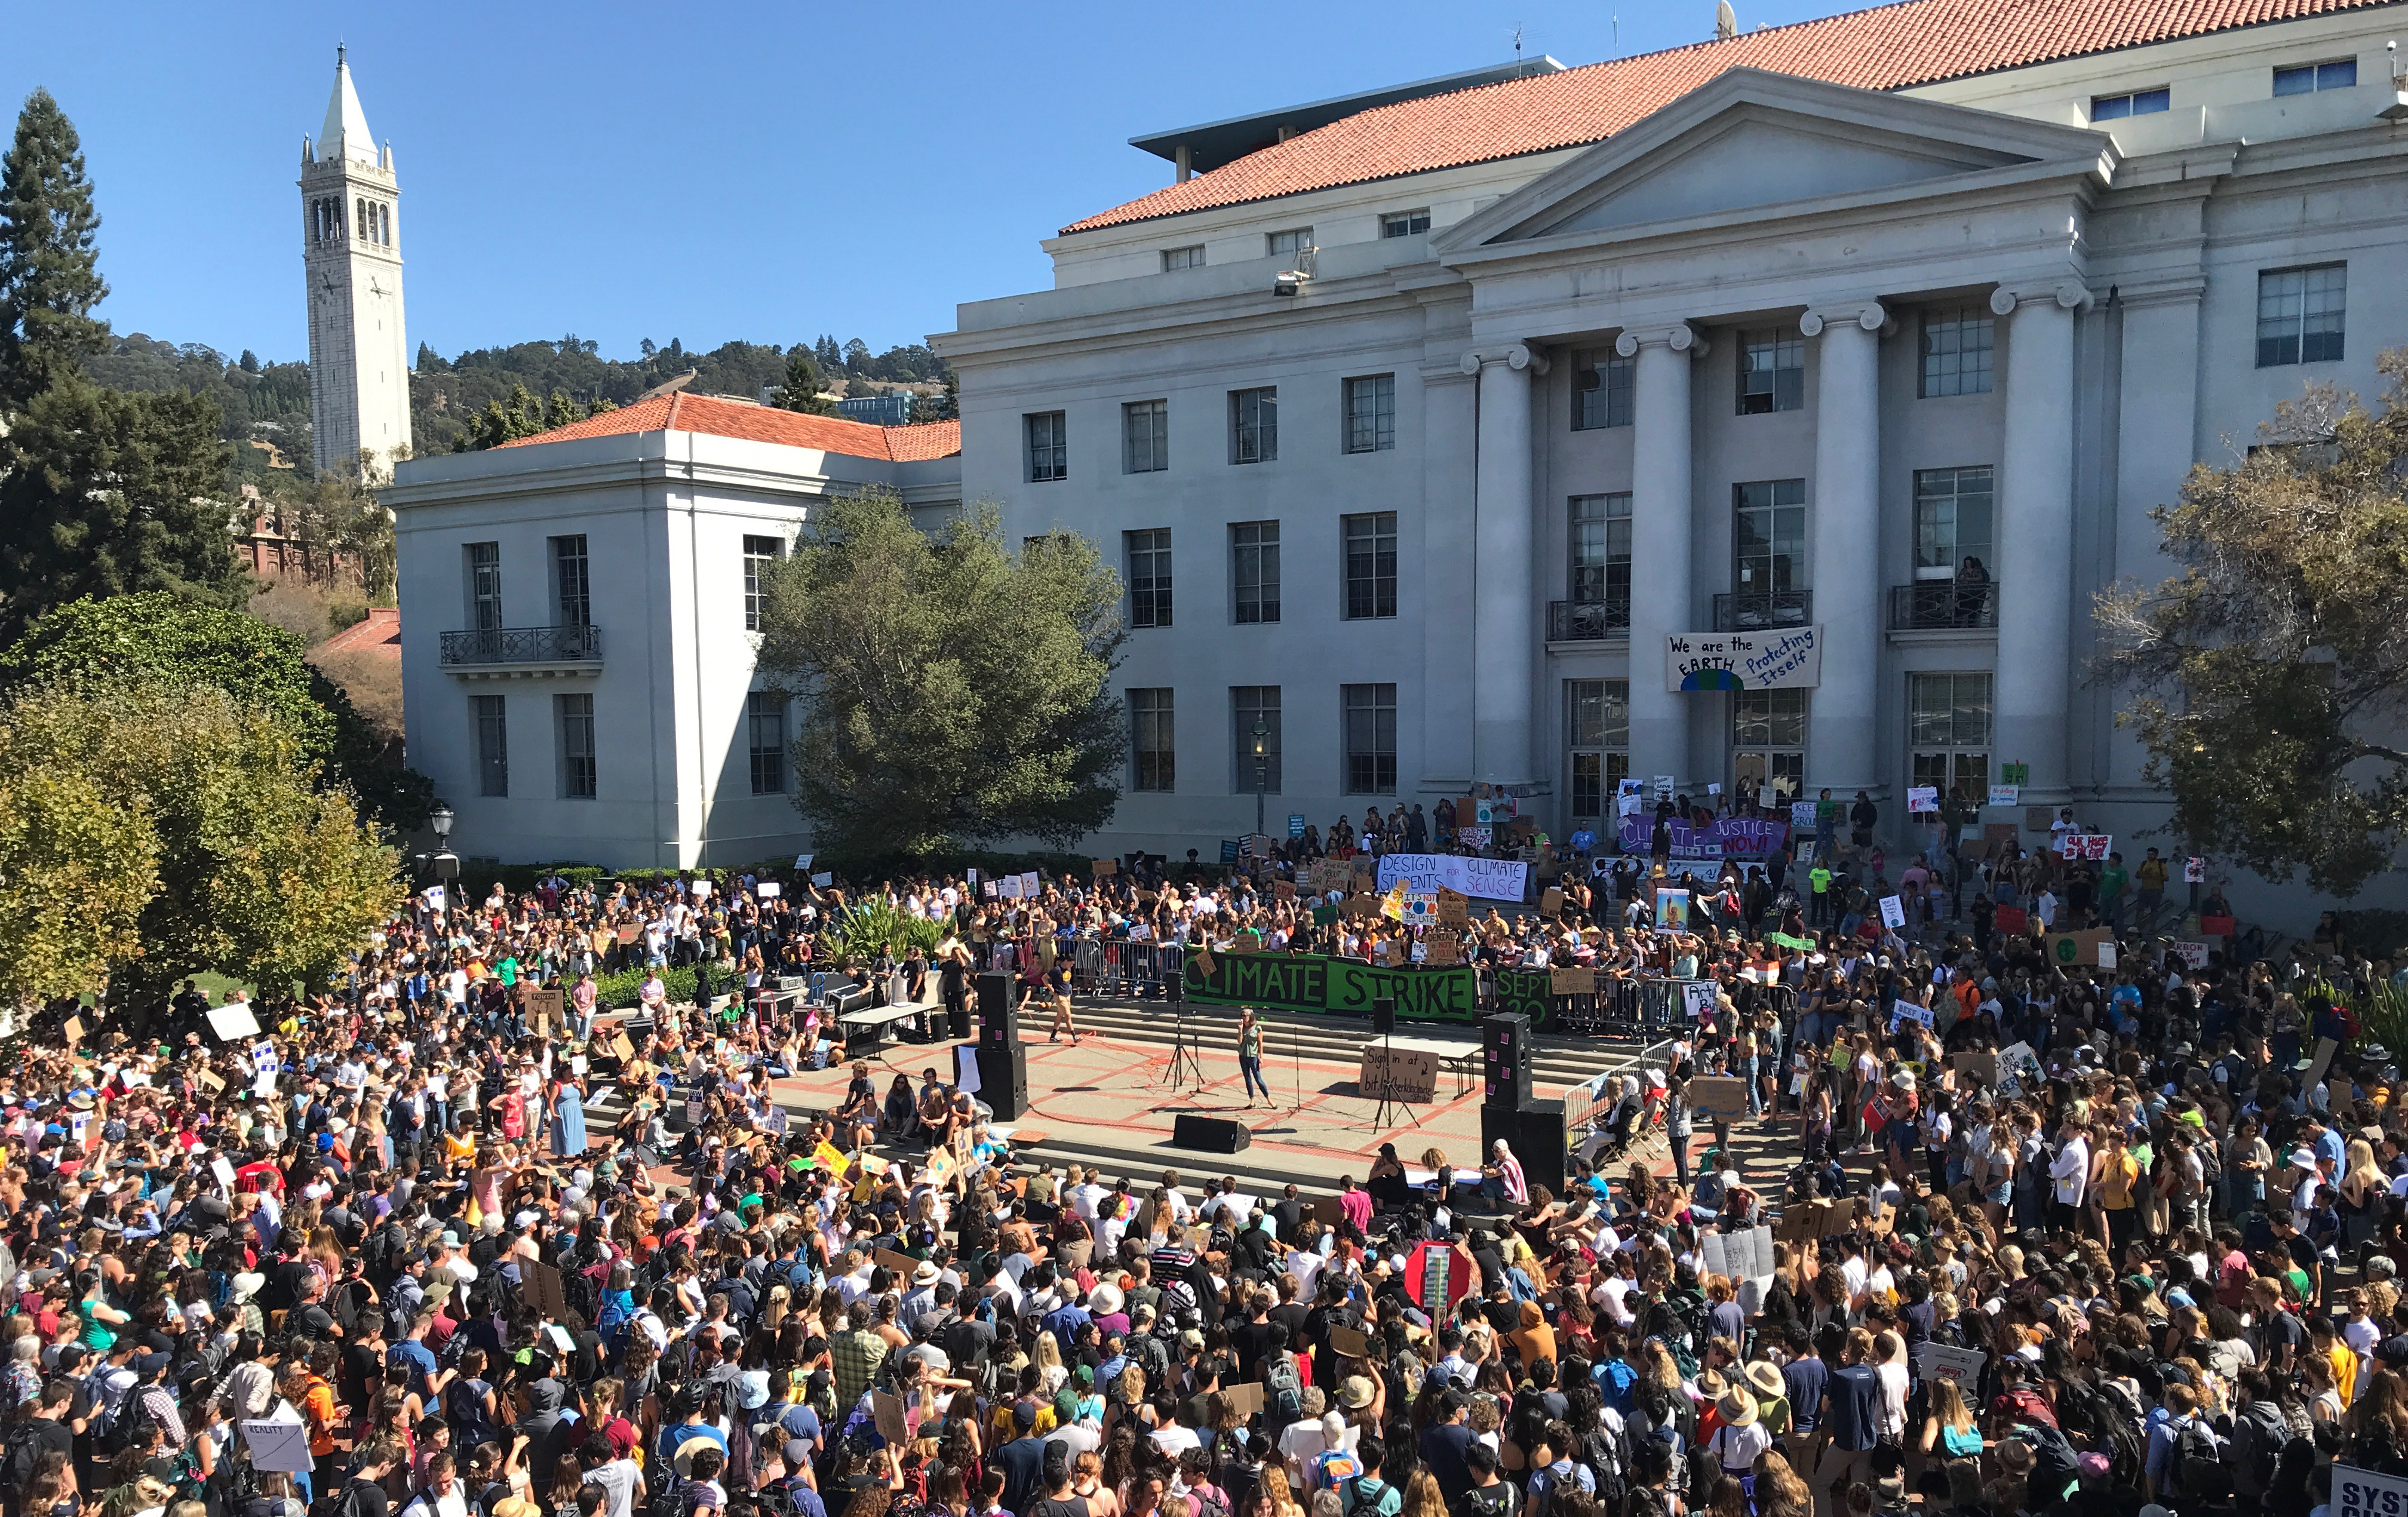 A crowd in front of Sproul Plaza for the Climate Strike. A woman is on a stage and the Campanile is in the background.